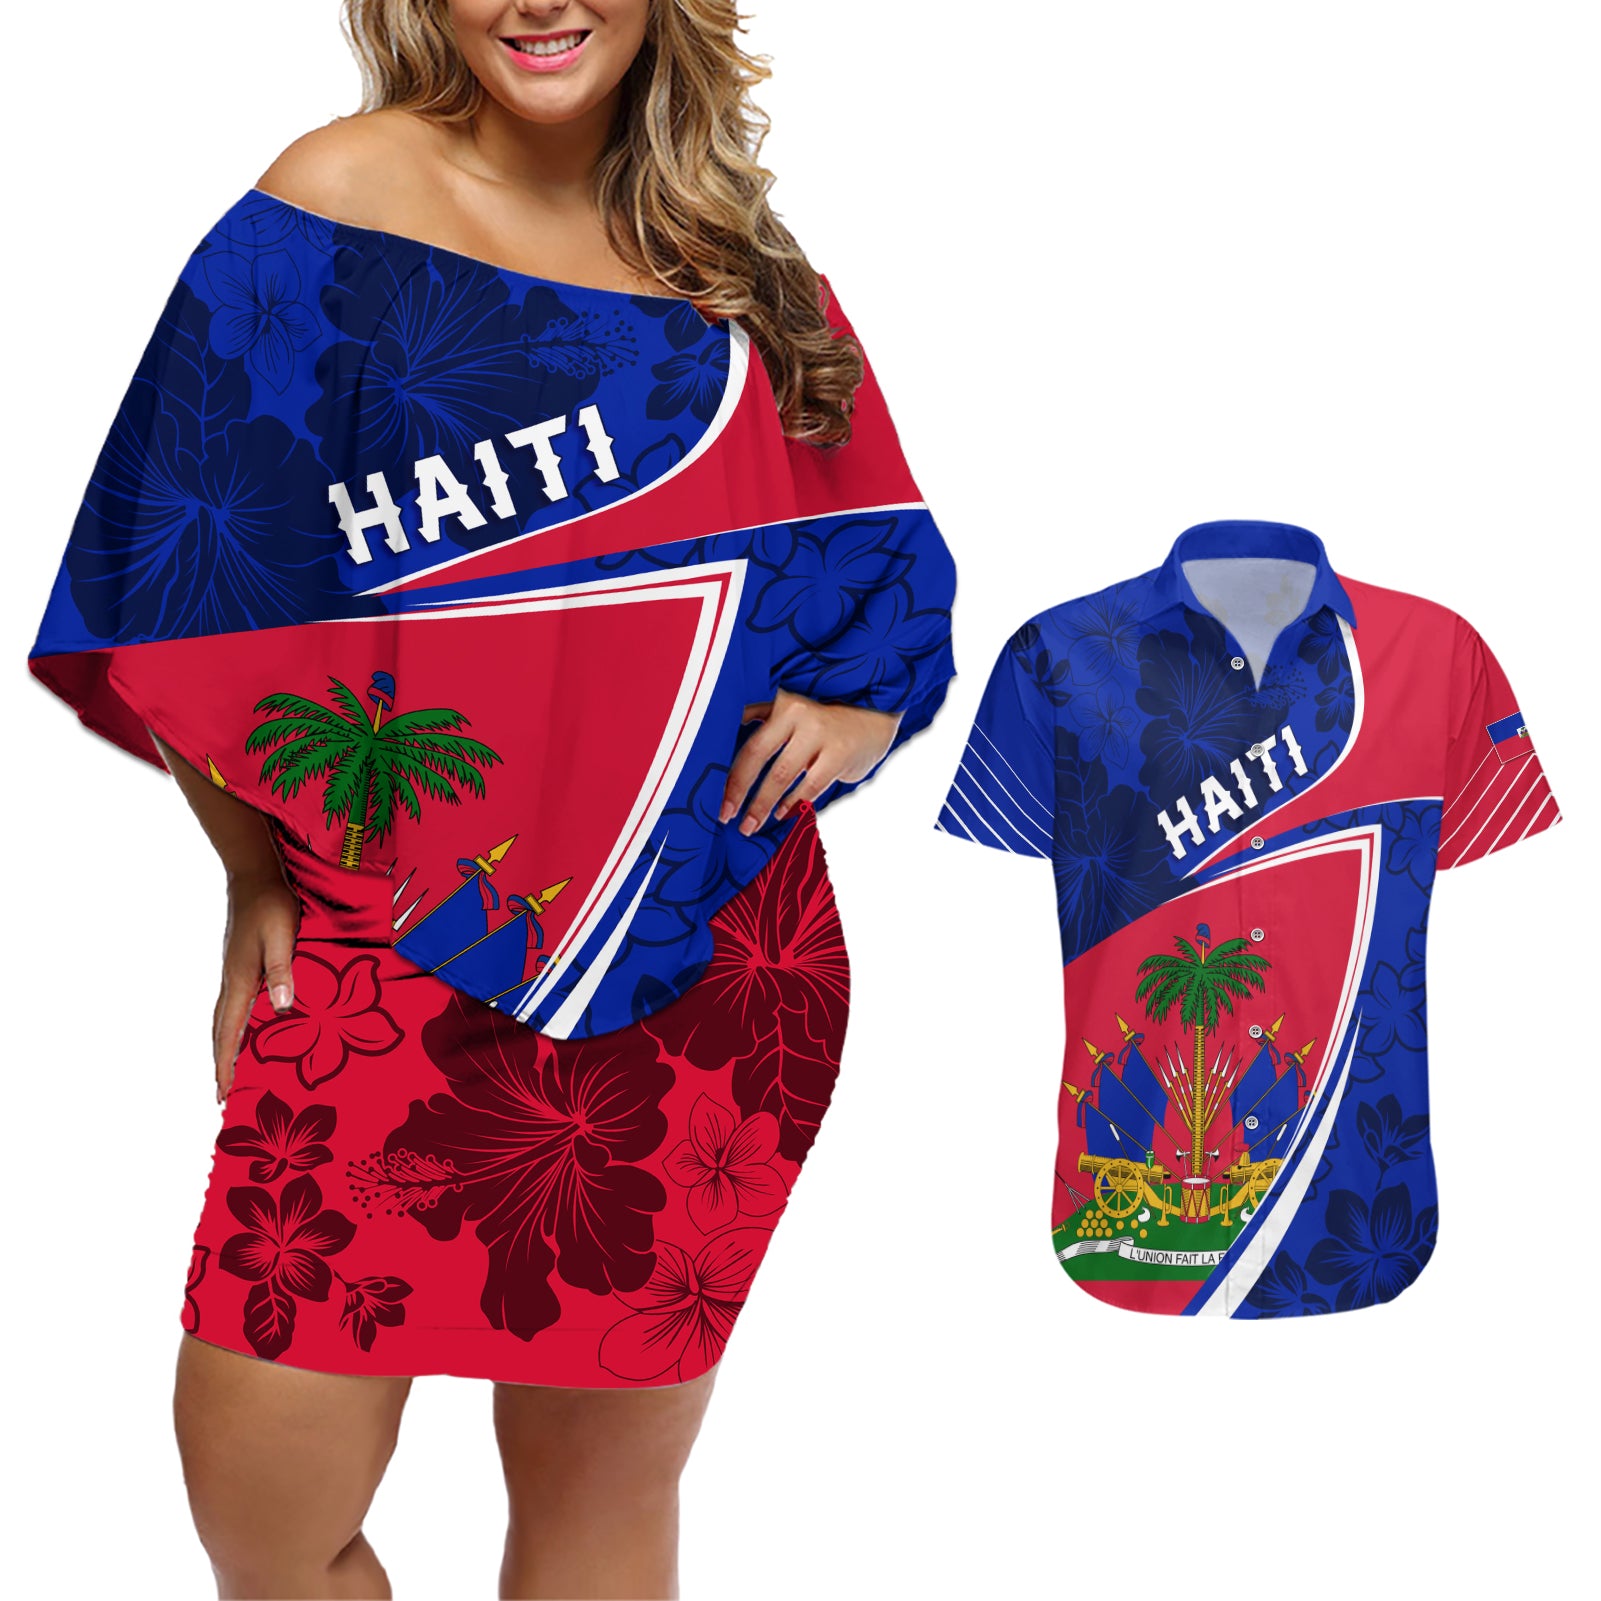 personalised-haiti-independence-anniversary-couples-matching-off-shoulder-short-dress-and-hawaiian-shirt-mix-hibiscus-flag-color